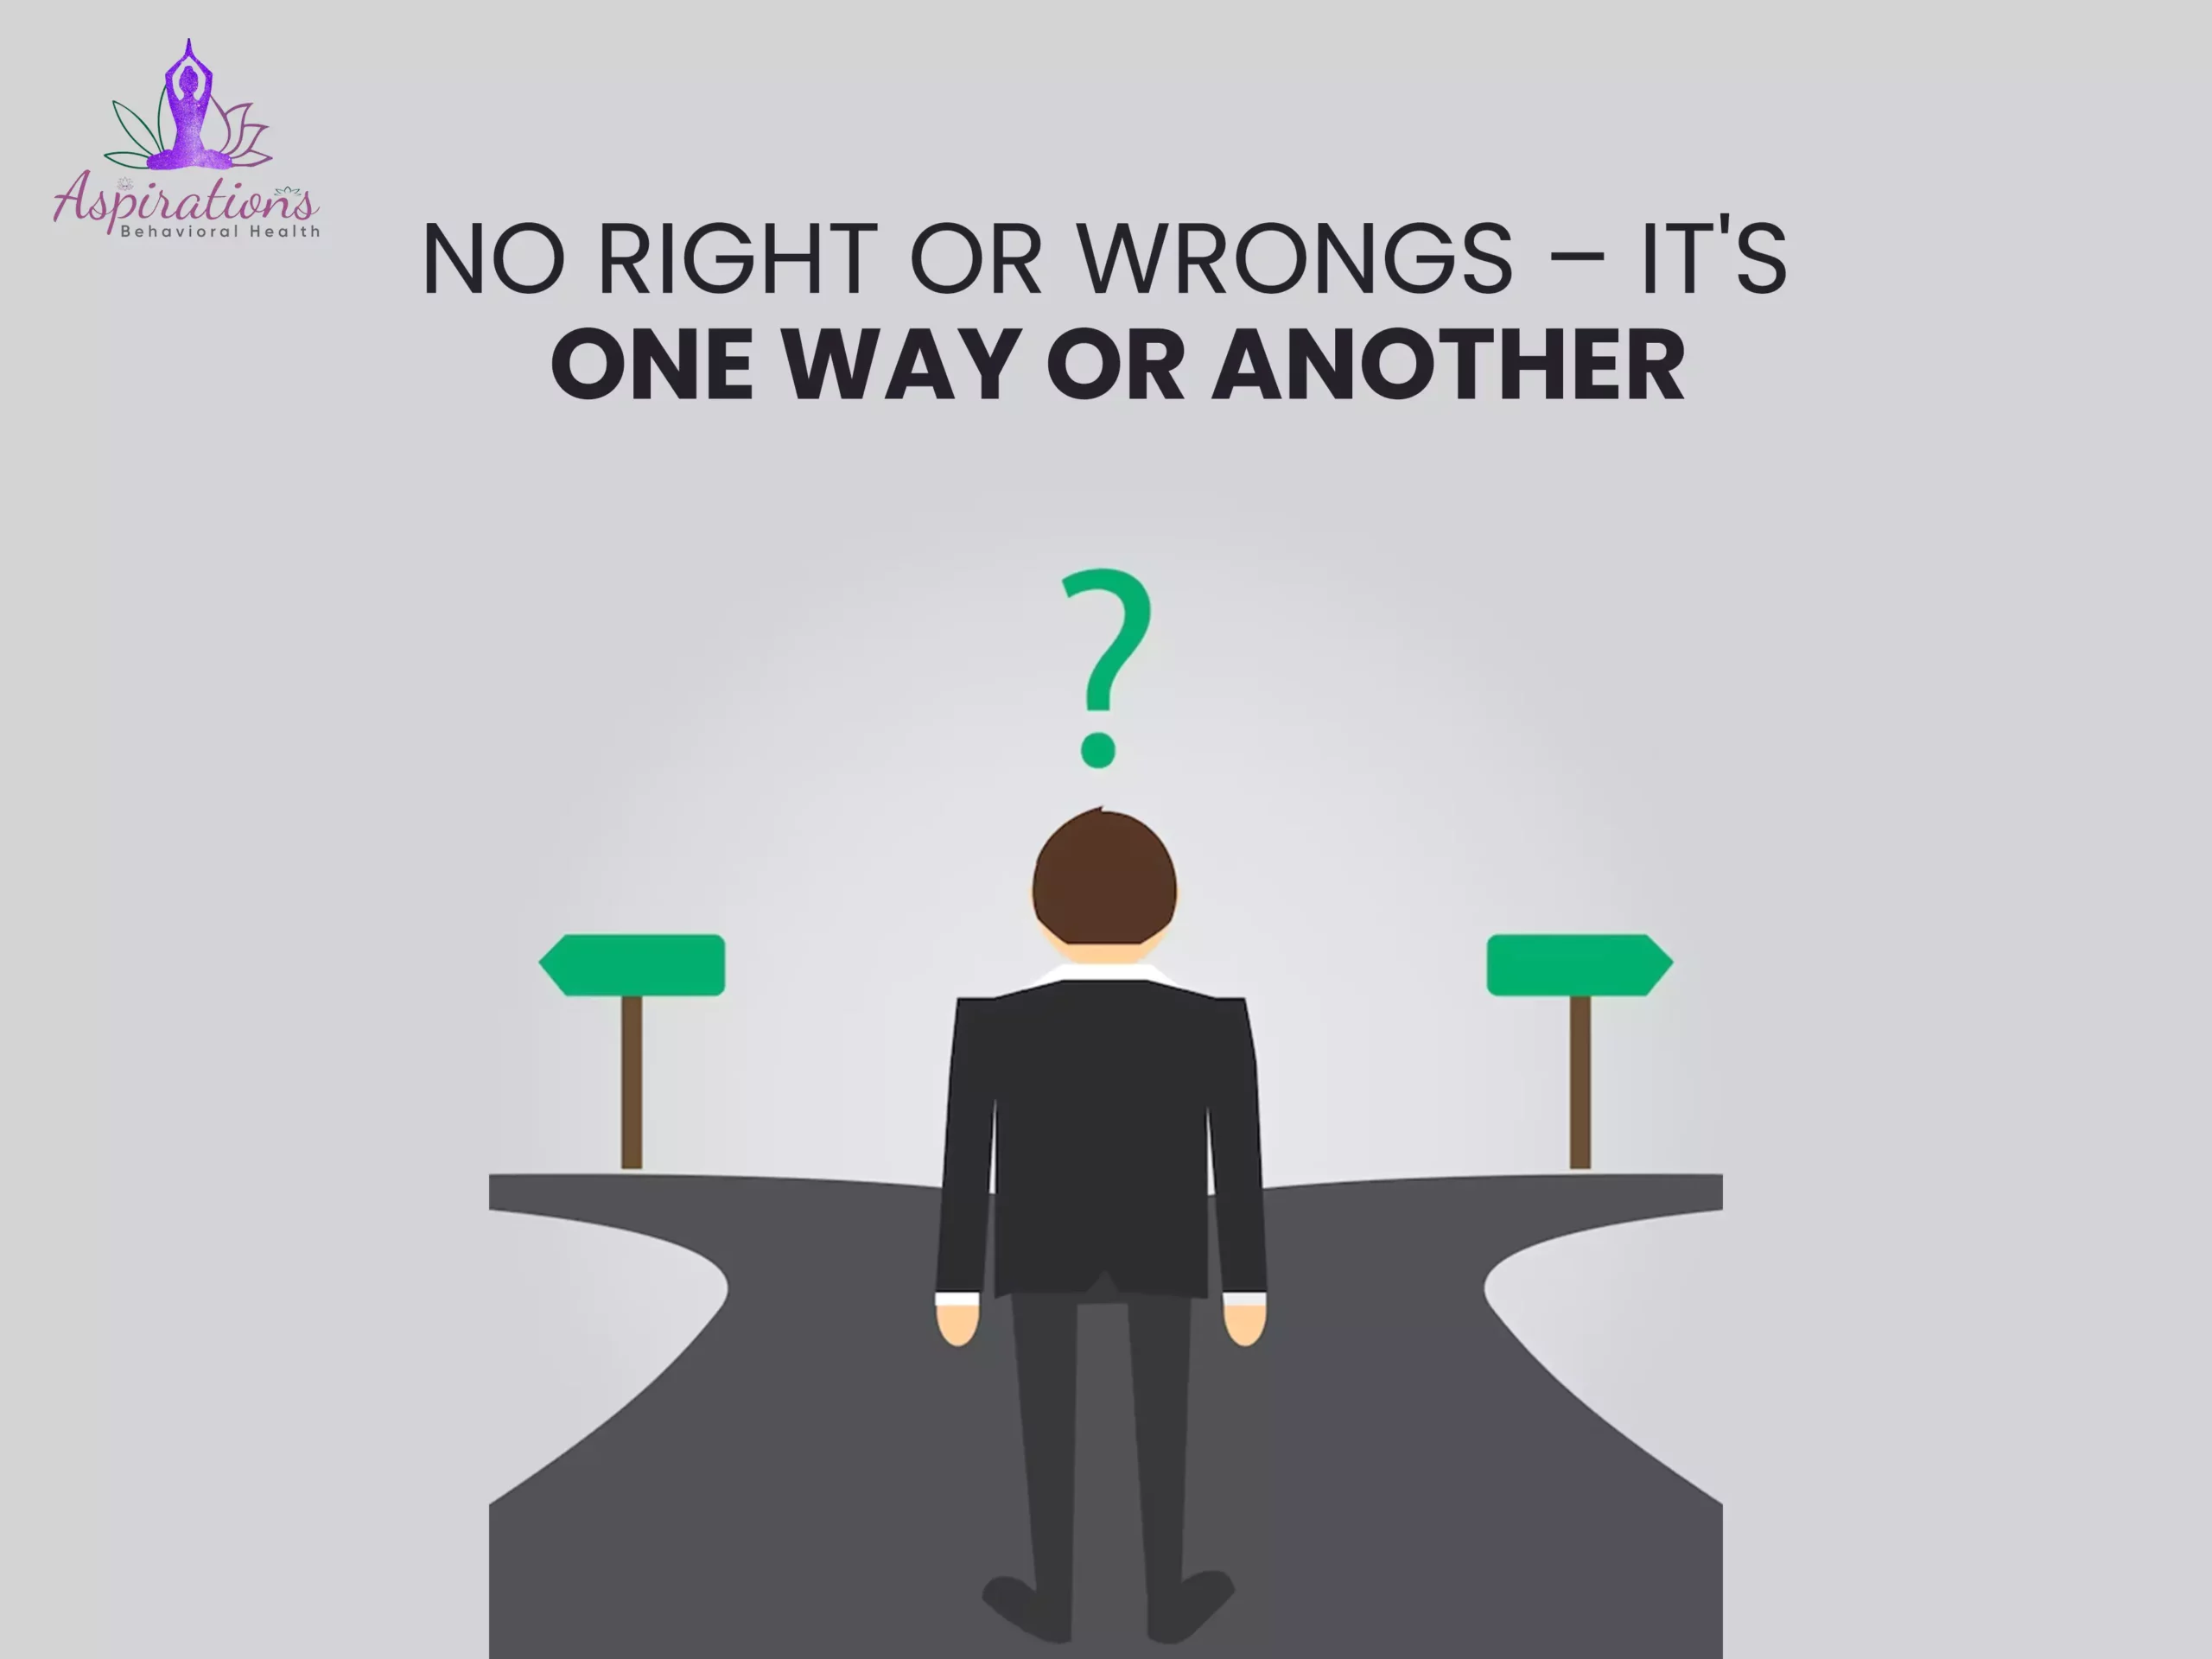 No Right or Wrongs – It's One Way or Another